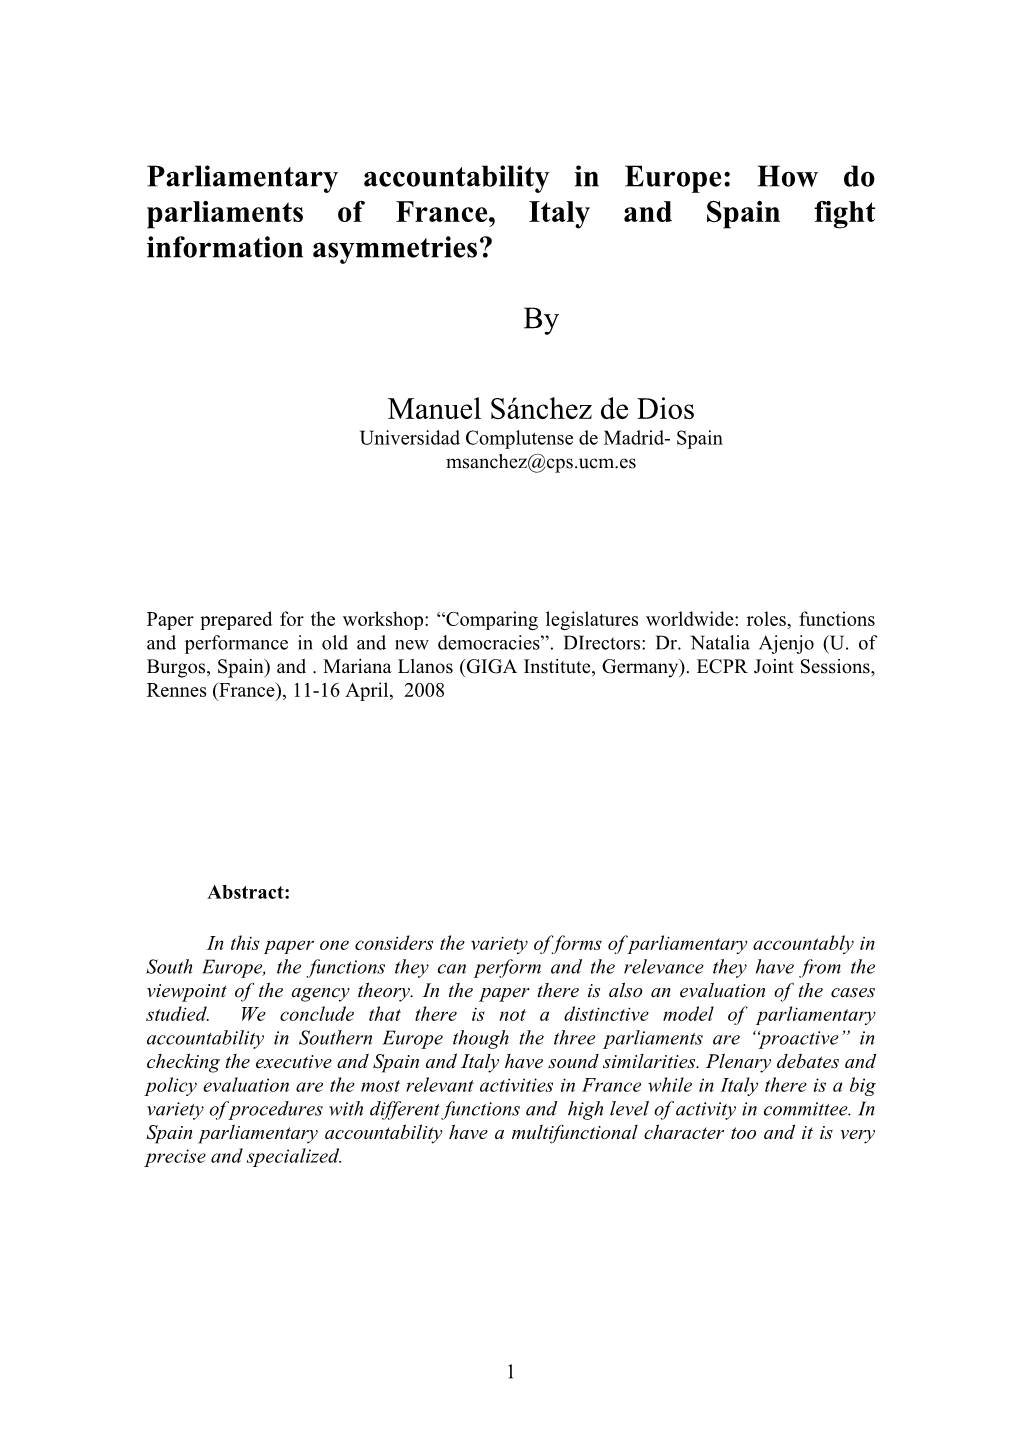 How Do Parliaments of France, Italy and Spain Fight Information Asymmetries?